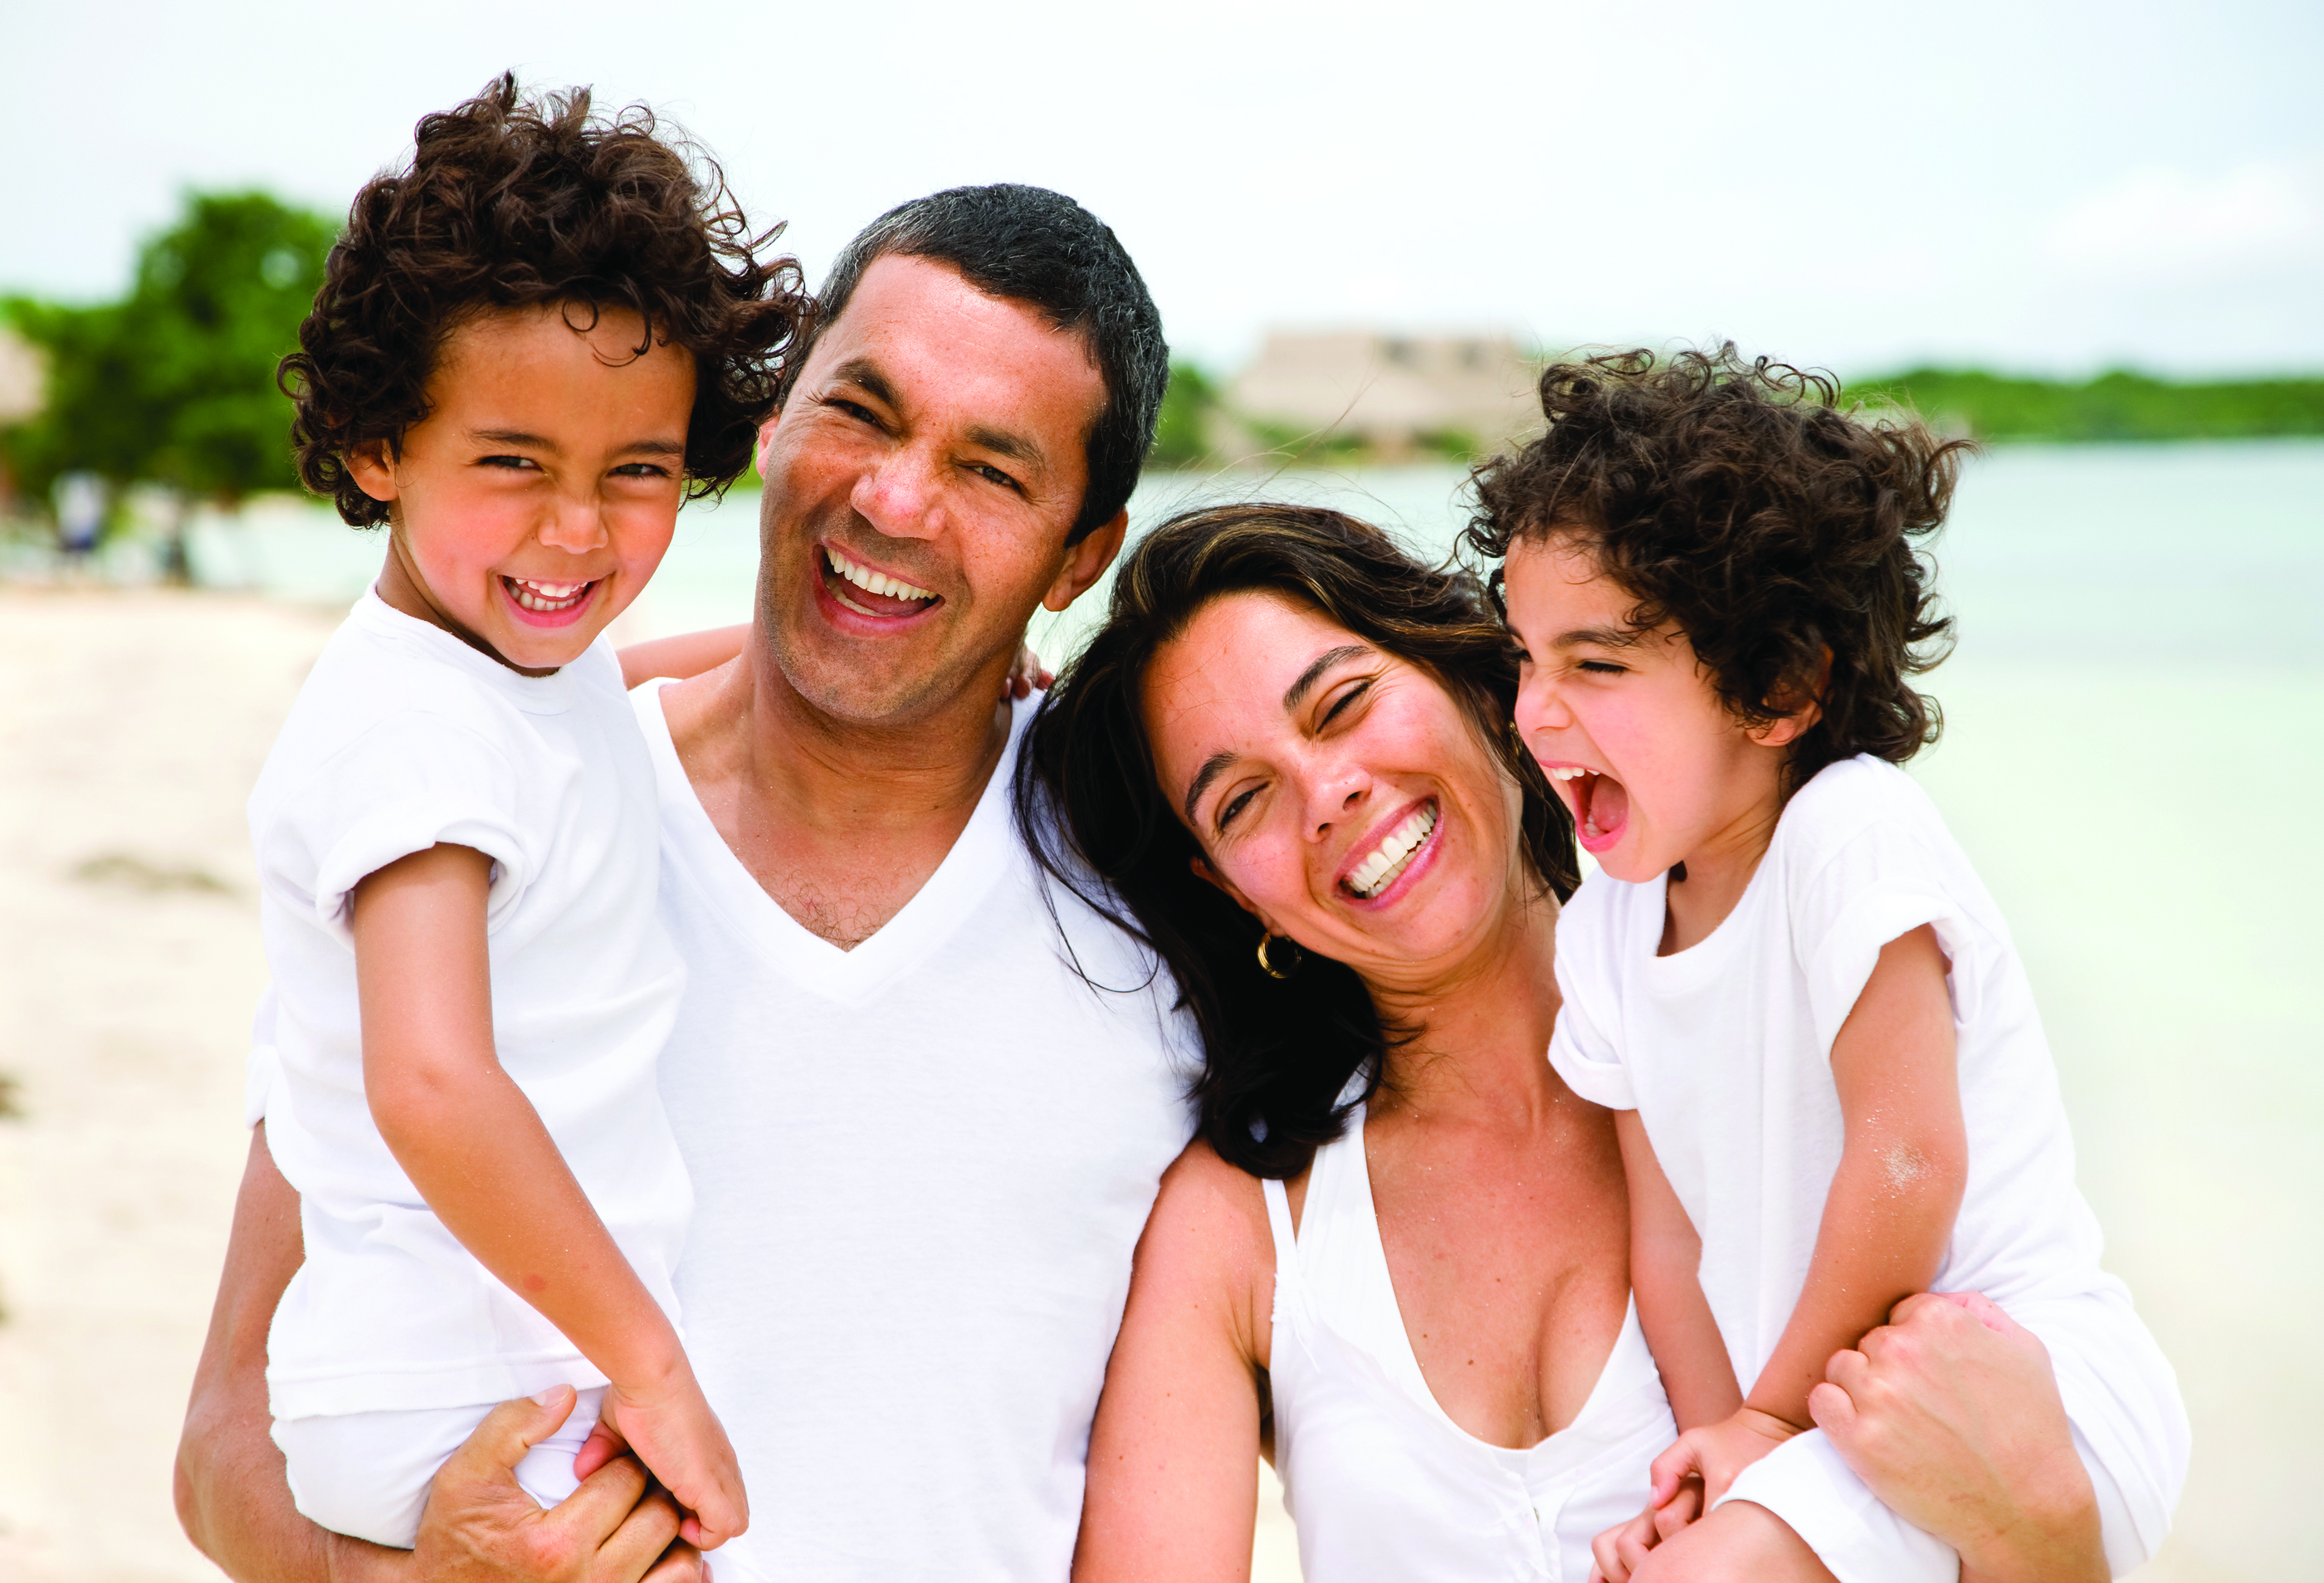 family with kids laughing and smiling on beach General Dentistry Marquette MI